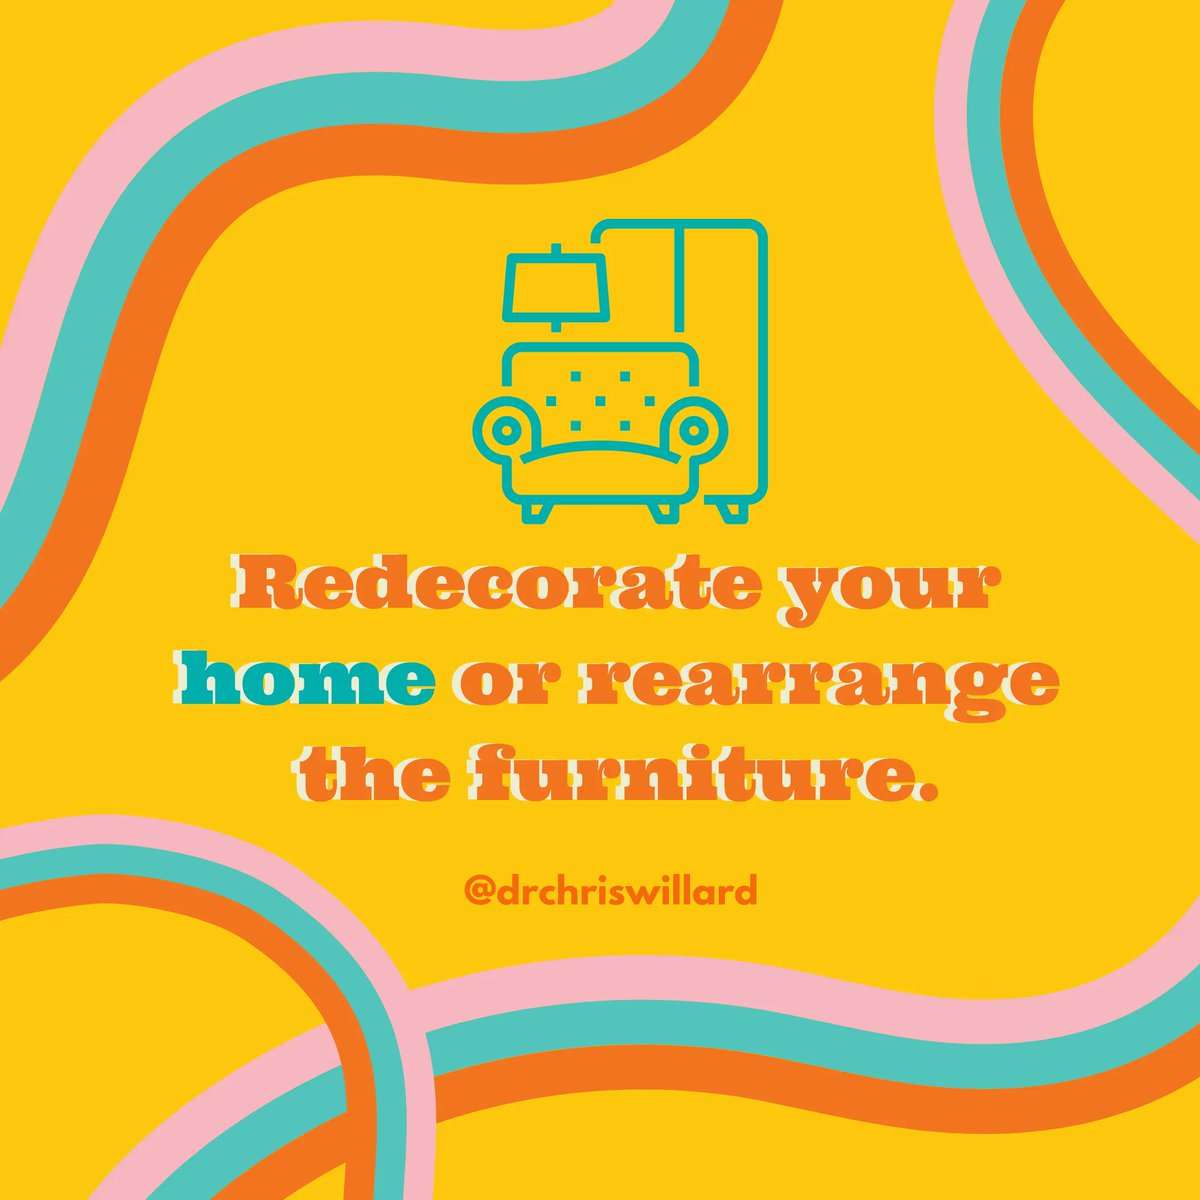 Redecorate your home or rearrange the furniture. 

#mindfulness #selfcare #selcareisntselfish #care #junechallenge #selcare #selflove #simplepractices #simplemindfulpractices🥺🥺🥺 InteriorStyling #ventiliation #officedesign #ventiliation  
Original: drchriswillard